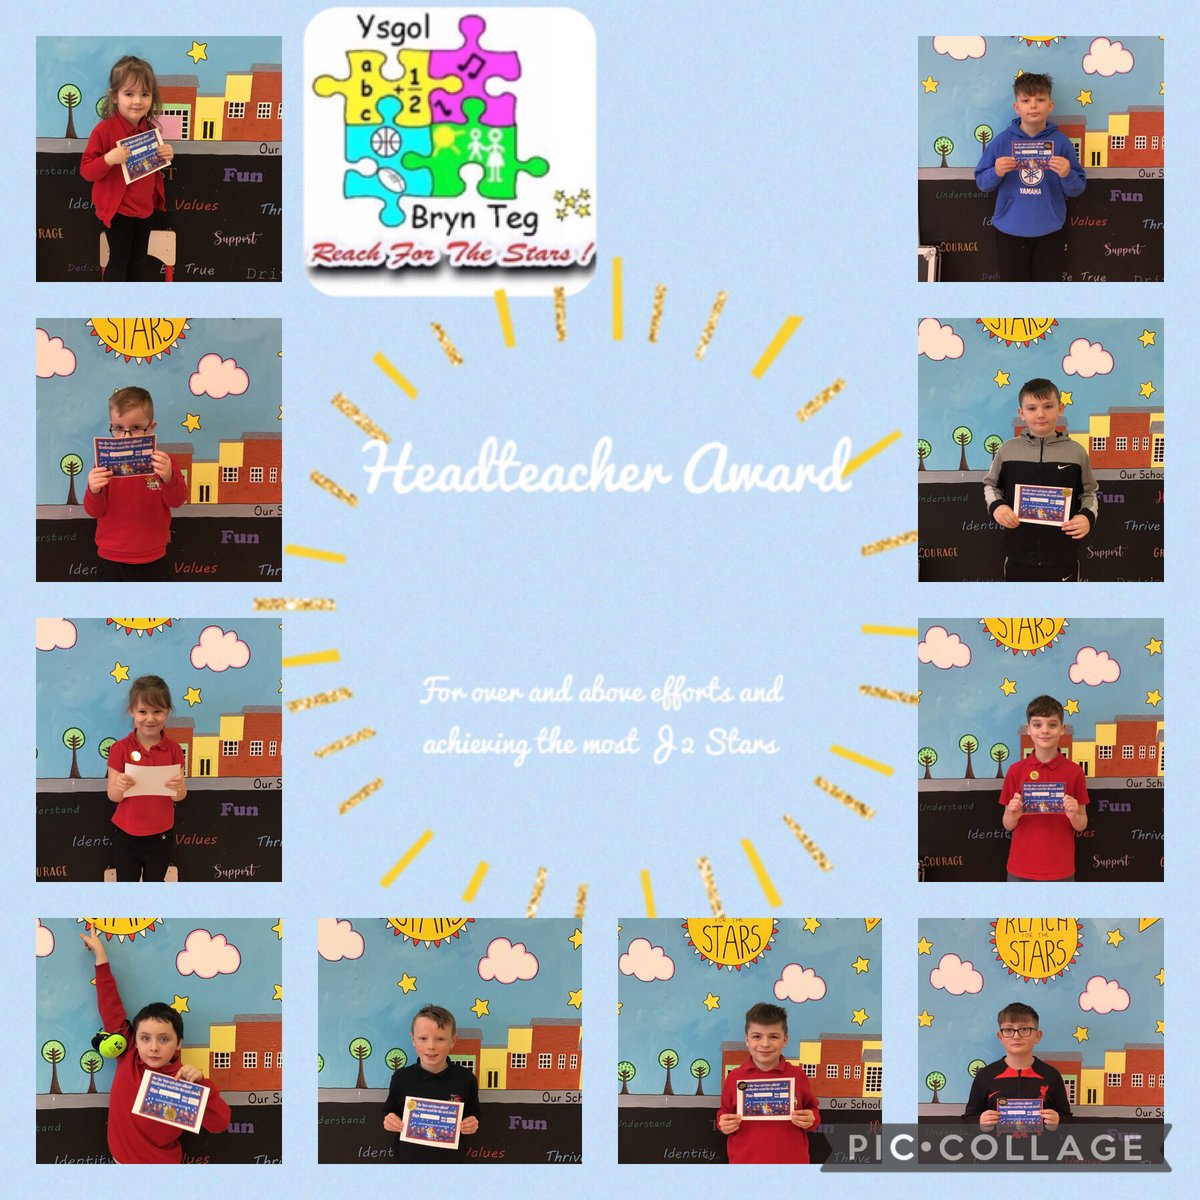 Congratulations to this weeks achievement award winners. Keep reaching for the stars.